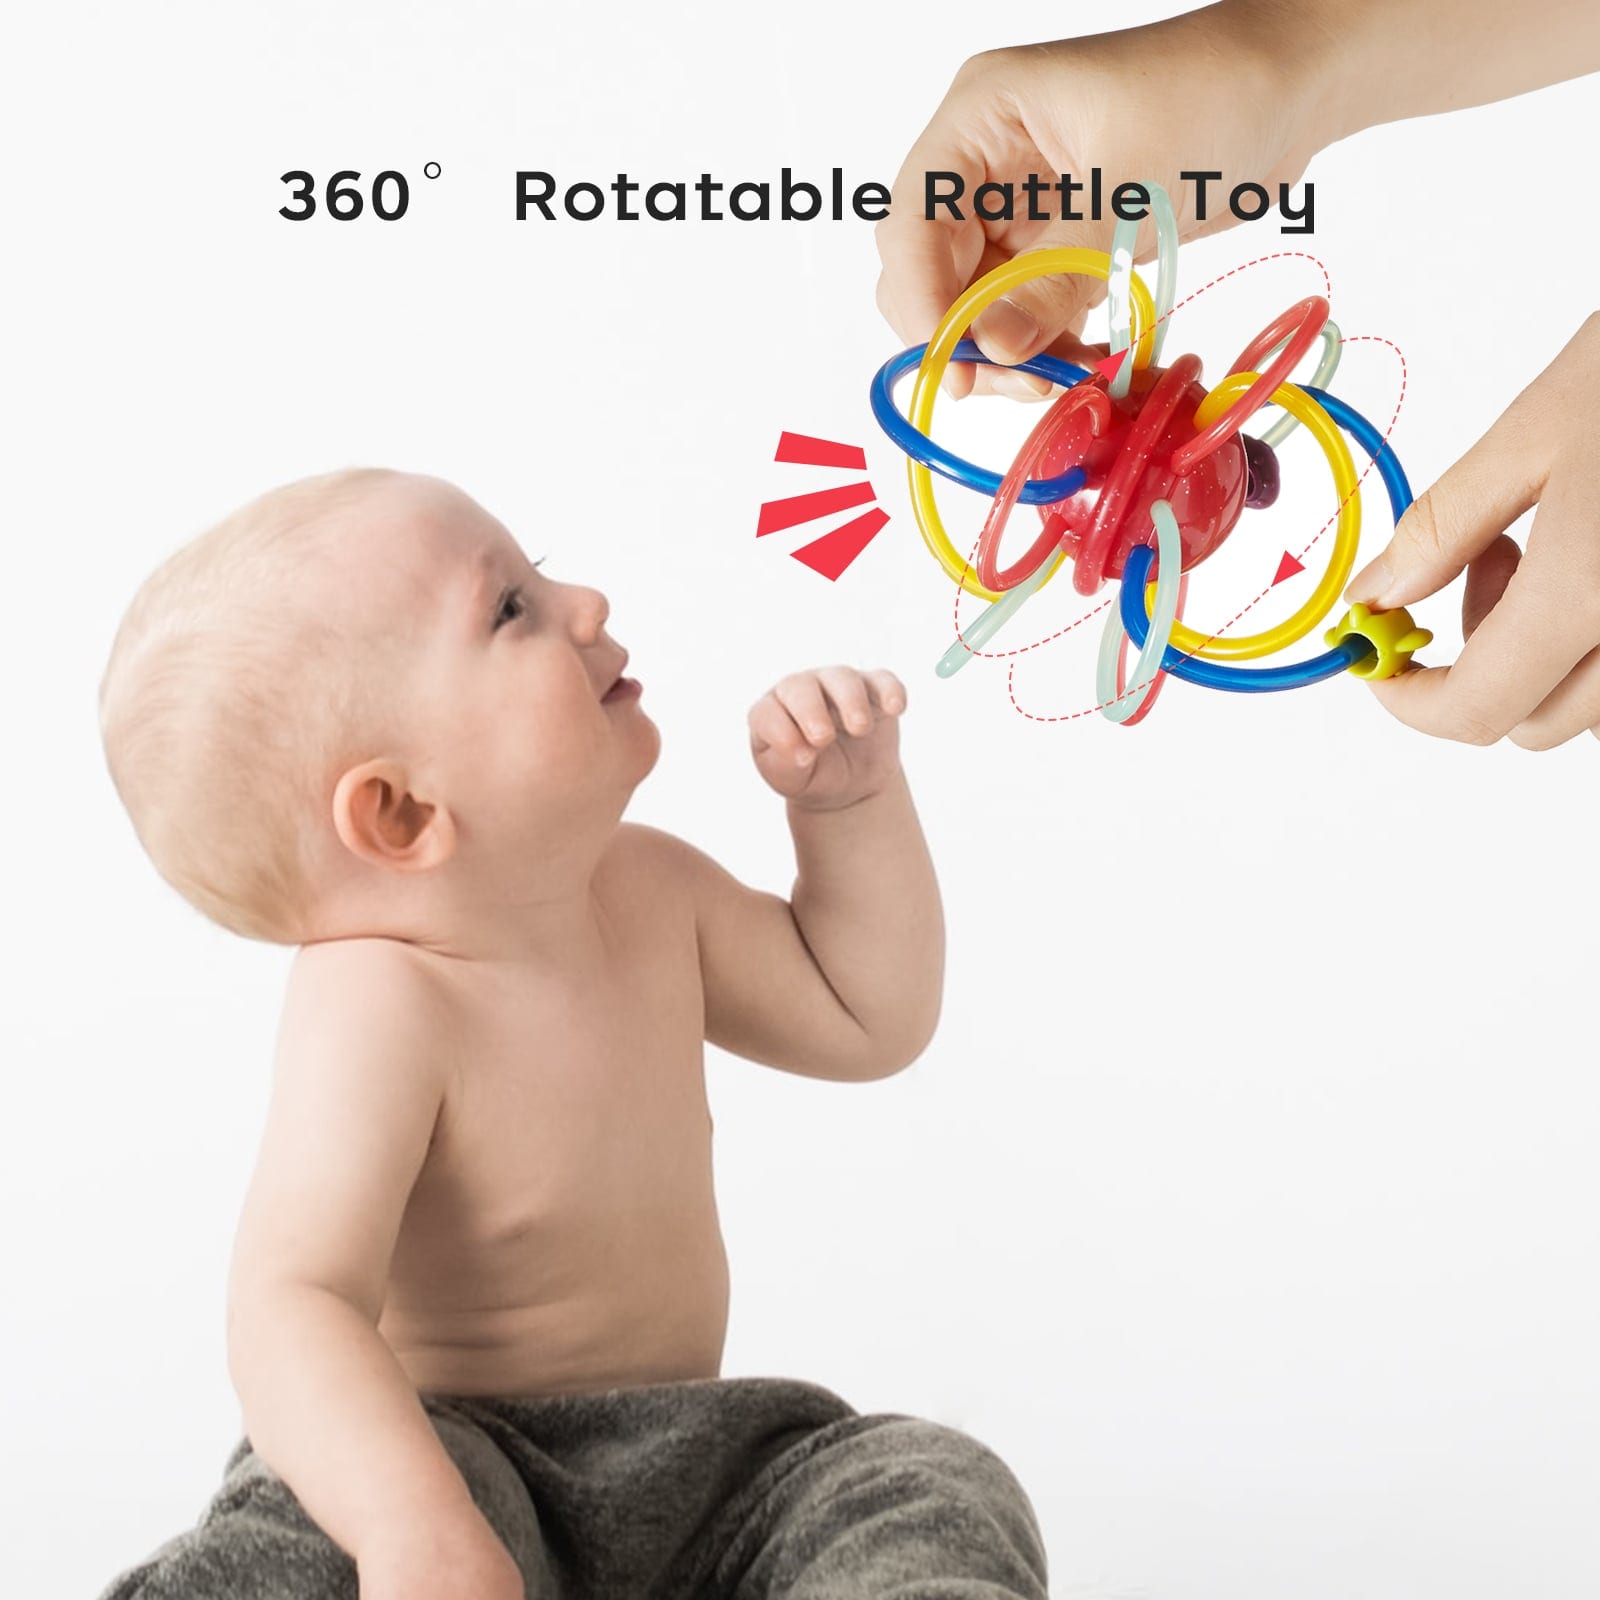 360 degree rotatable rattle toy and teether